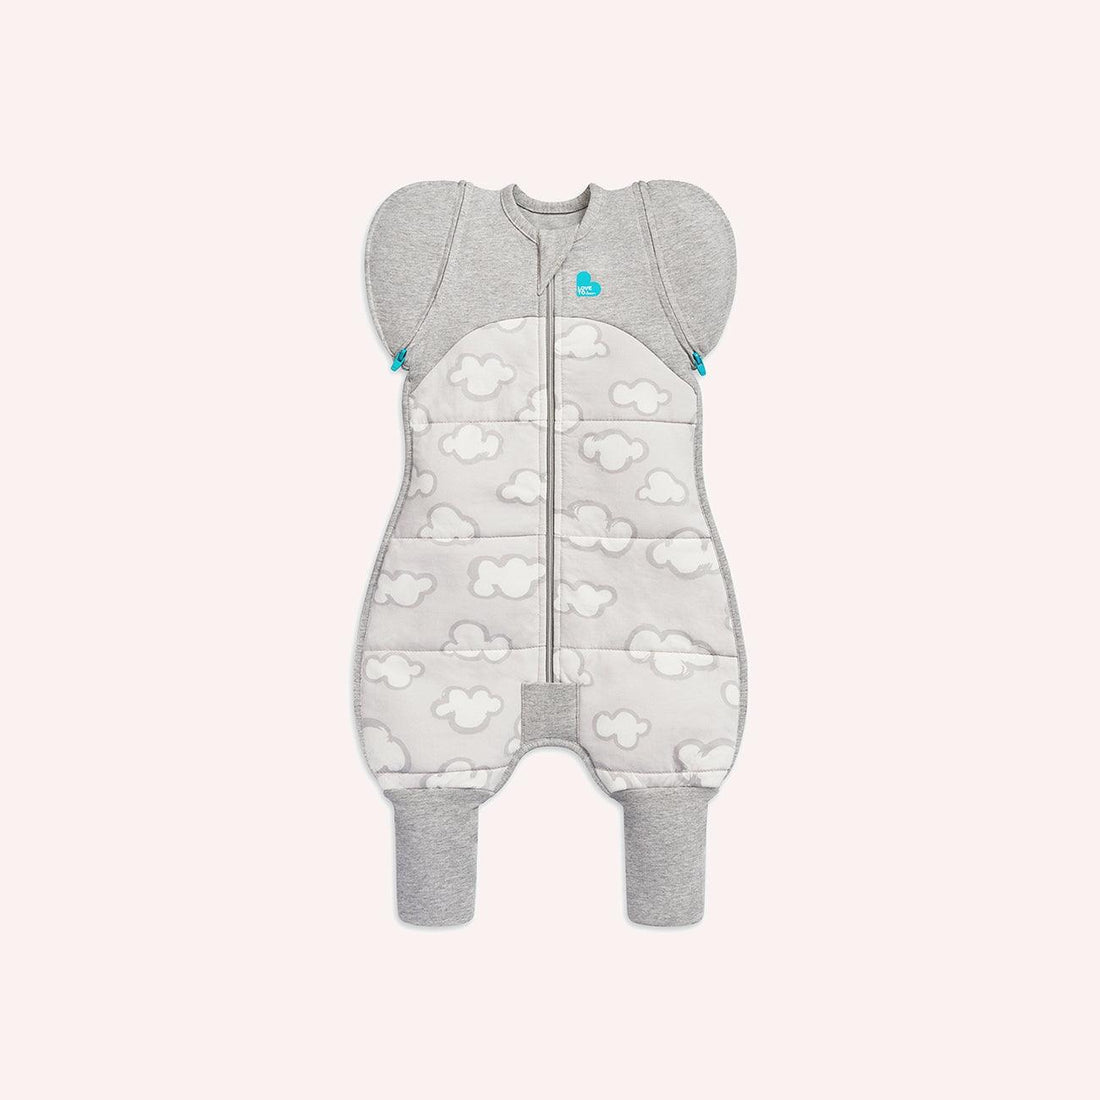 Stage 2 Transition Suit - 2.5 TOG - Grey - Daydream